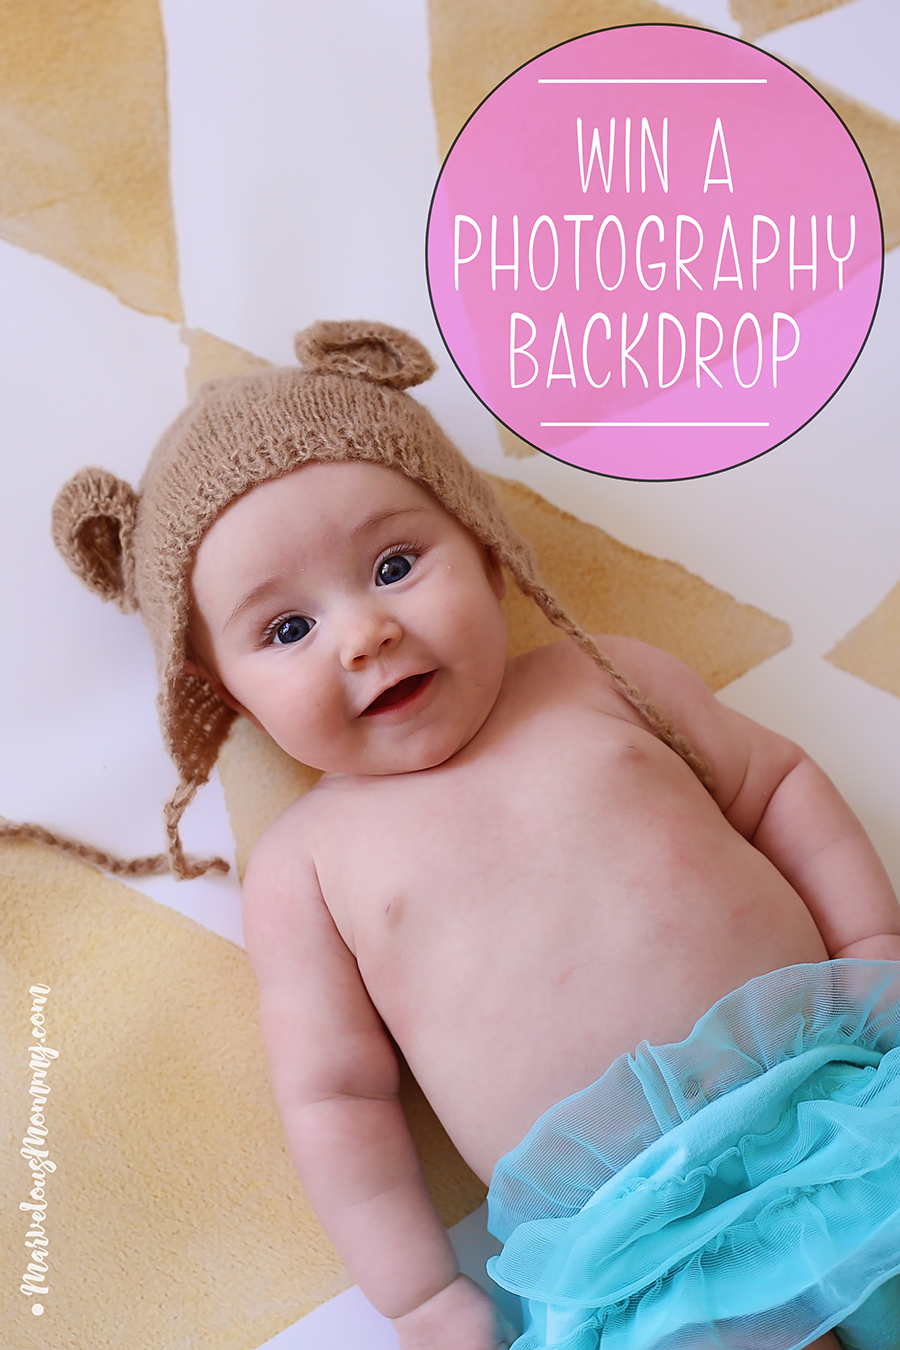 WIN A PHOTOGRAPHY BACKDROP FROM PEPPERLU